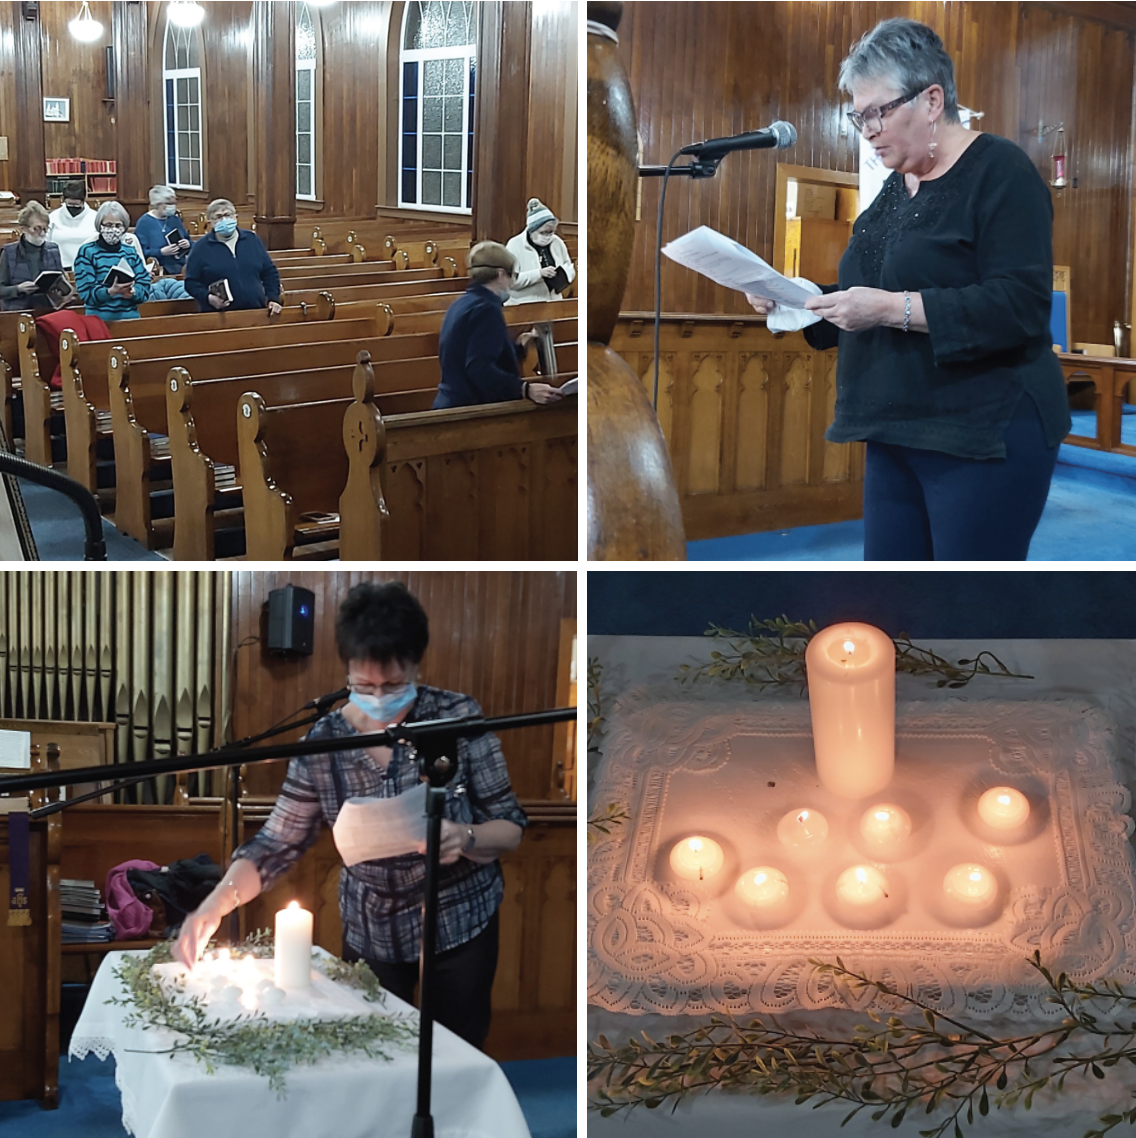 World Day of Prayer photos from Port aux Basques